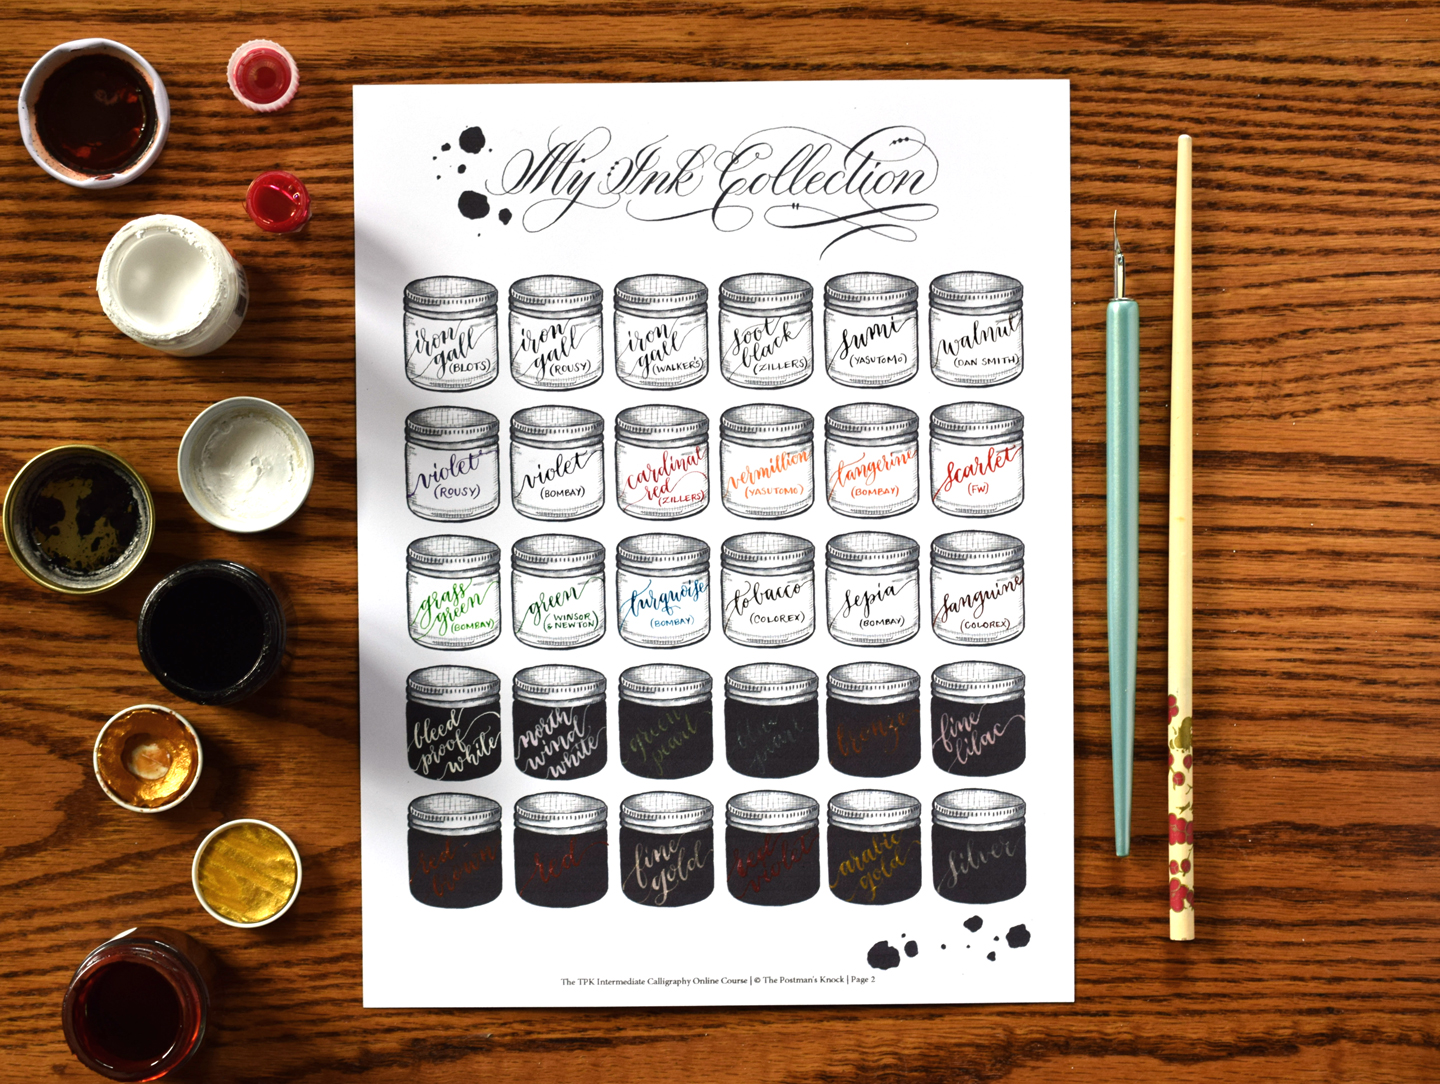 Every Calligraphy Ink Question You Ever Had … Answered!